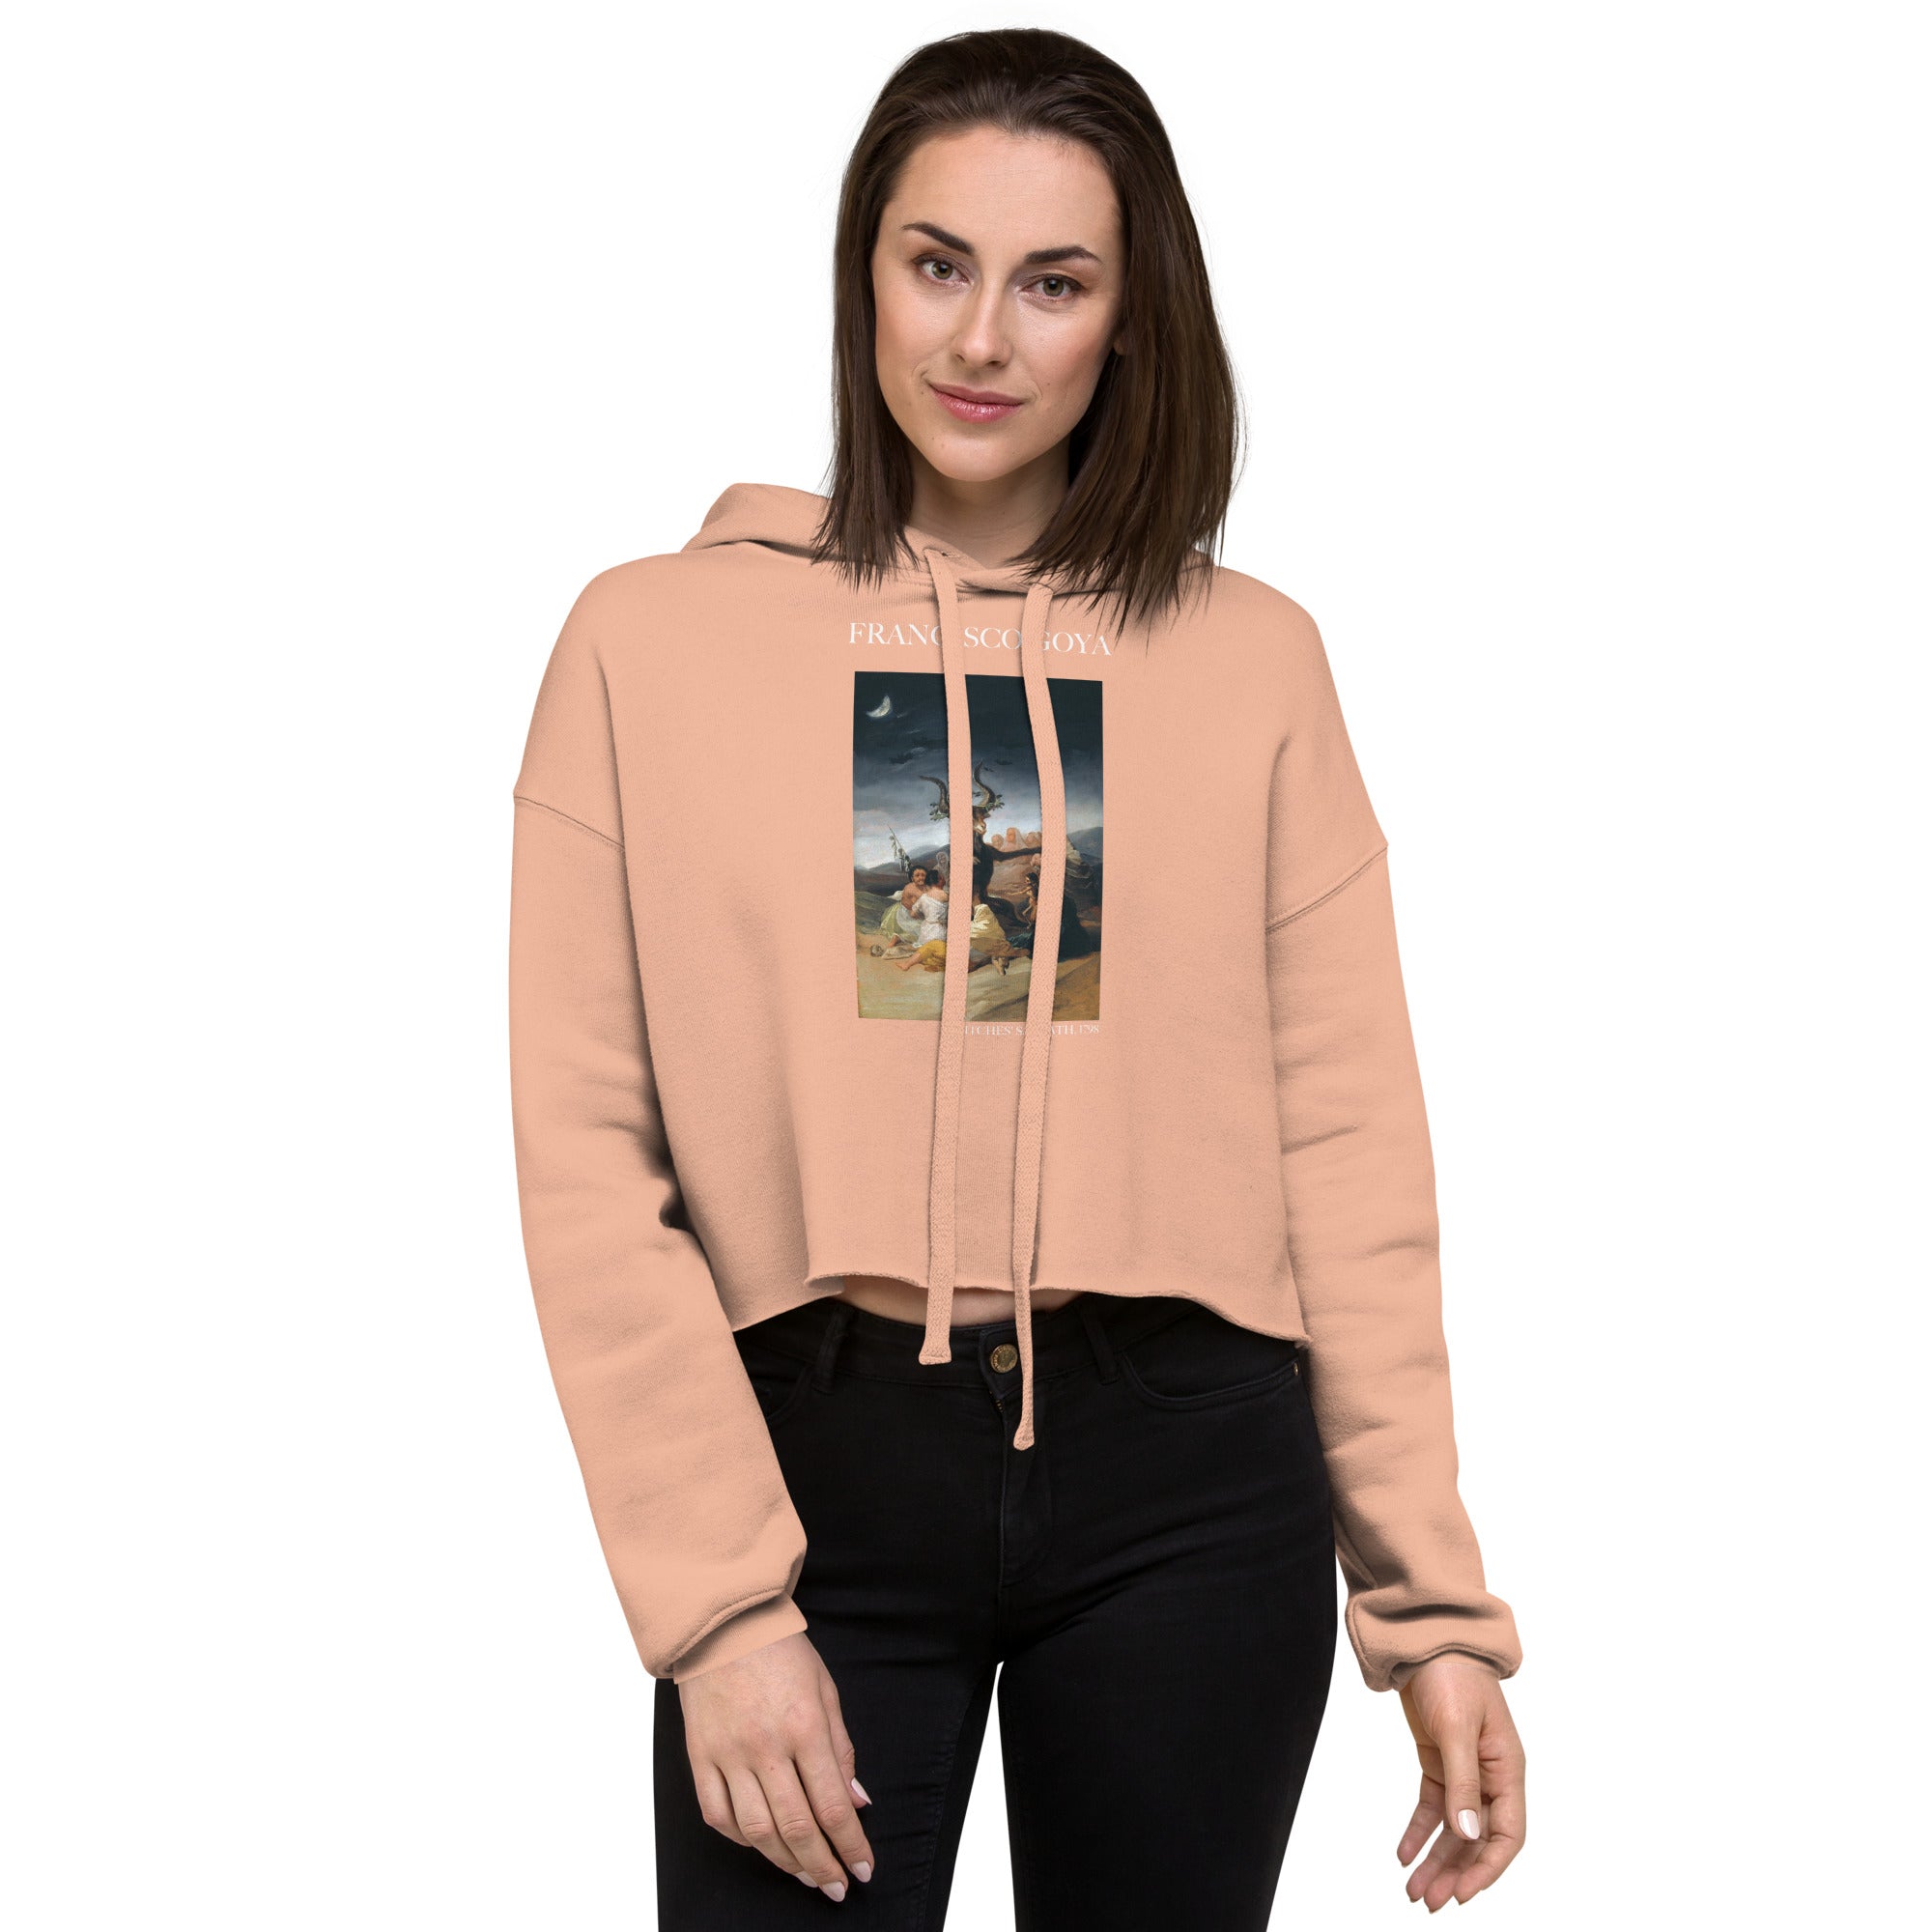 Francisco Goya 'Witches' Sabbath' Famous Painting Cropped Hoodie | Premium Art Cropped Hoodie